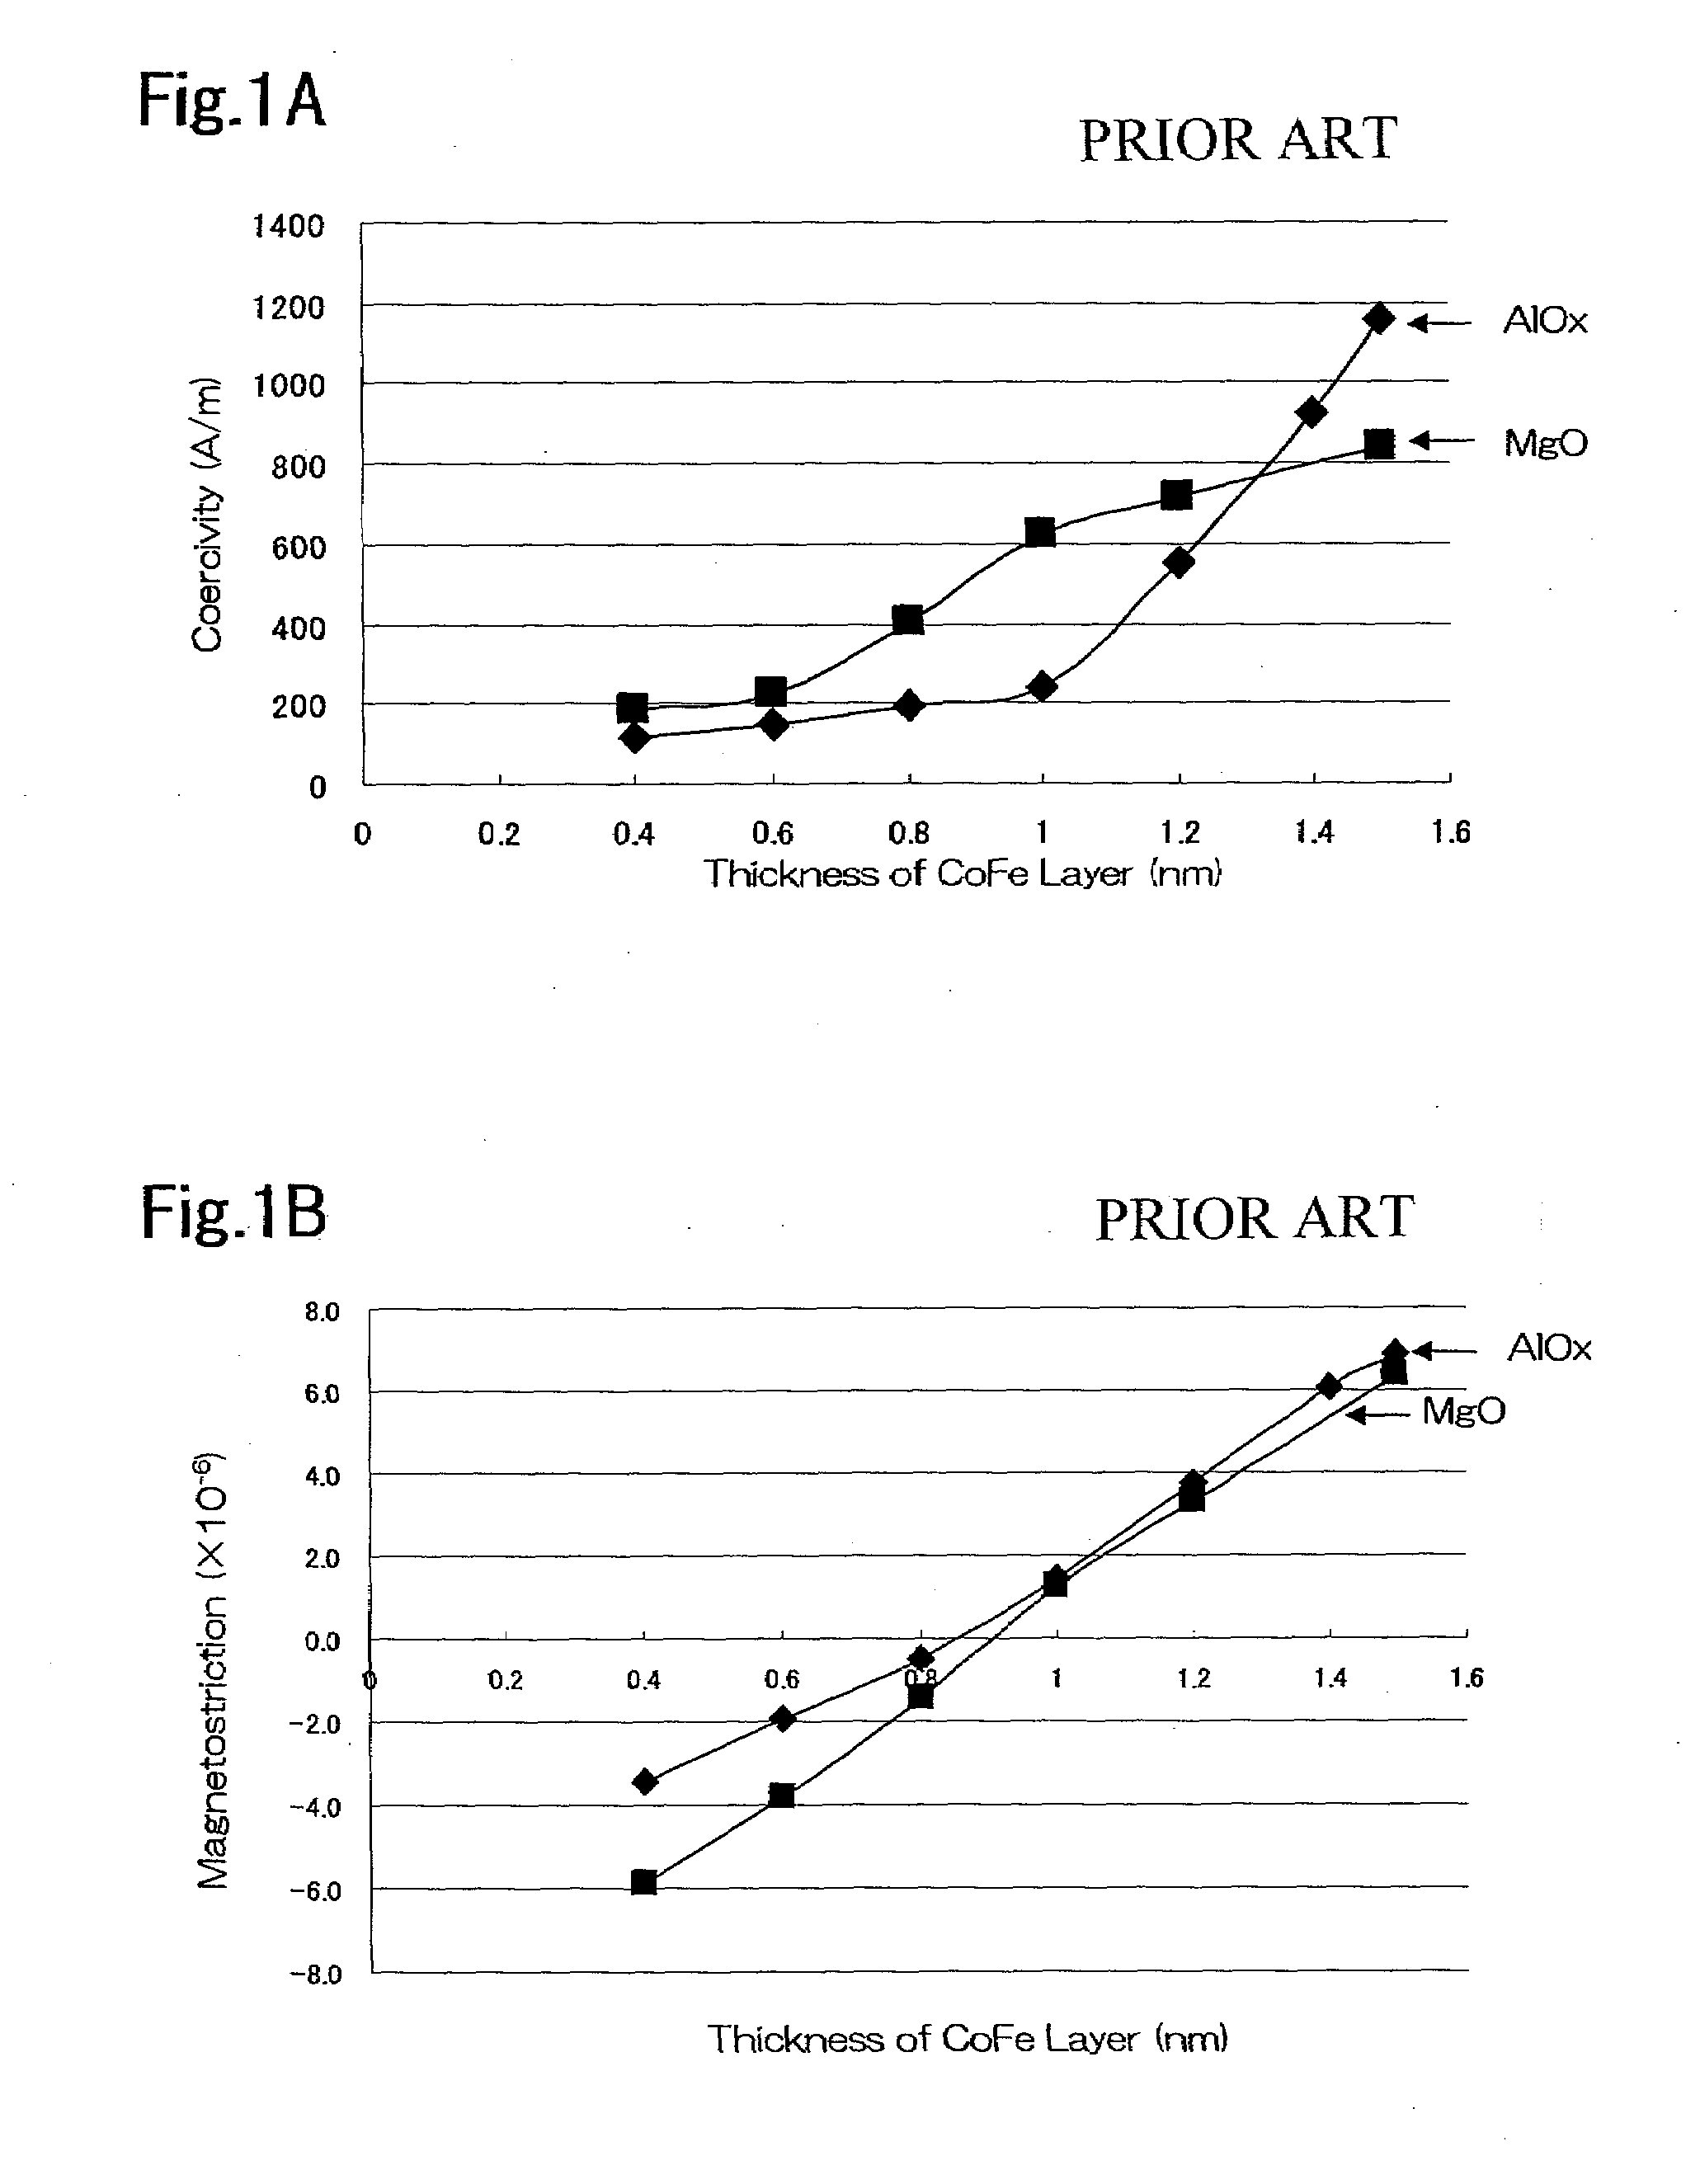 Cpp-type magneto resistive effect element having a pair of magnetic layers